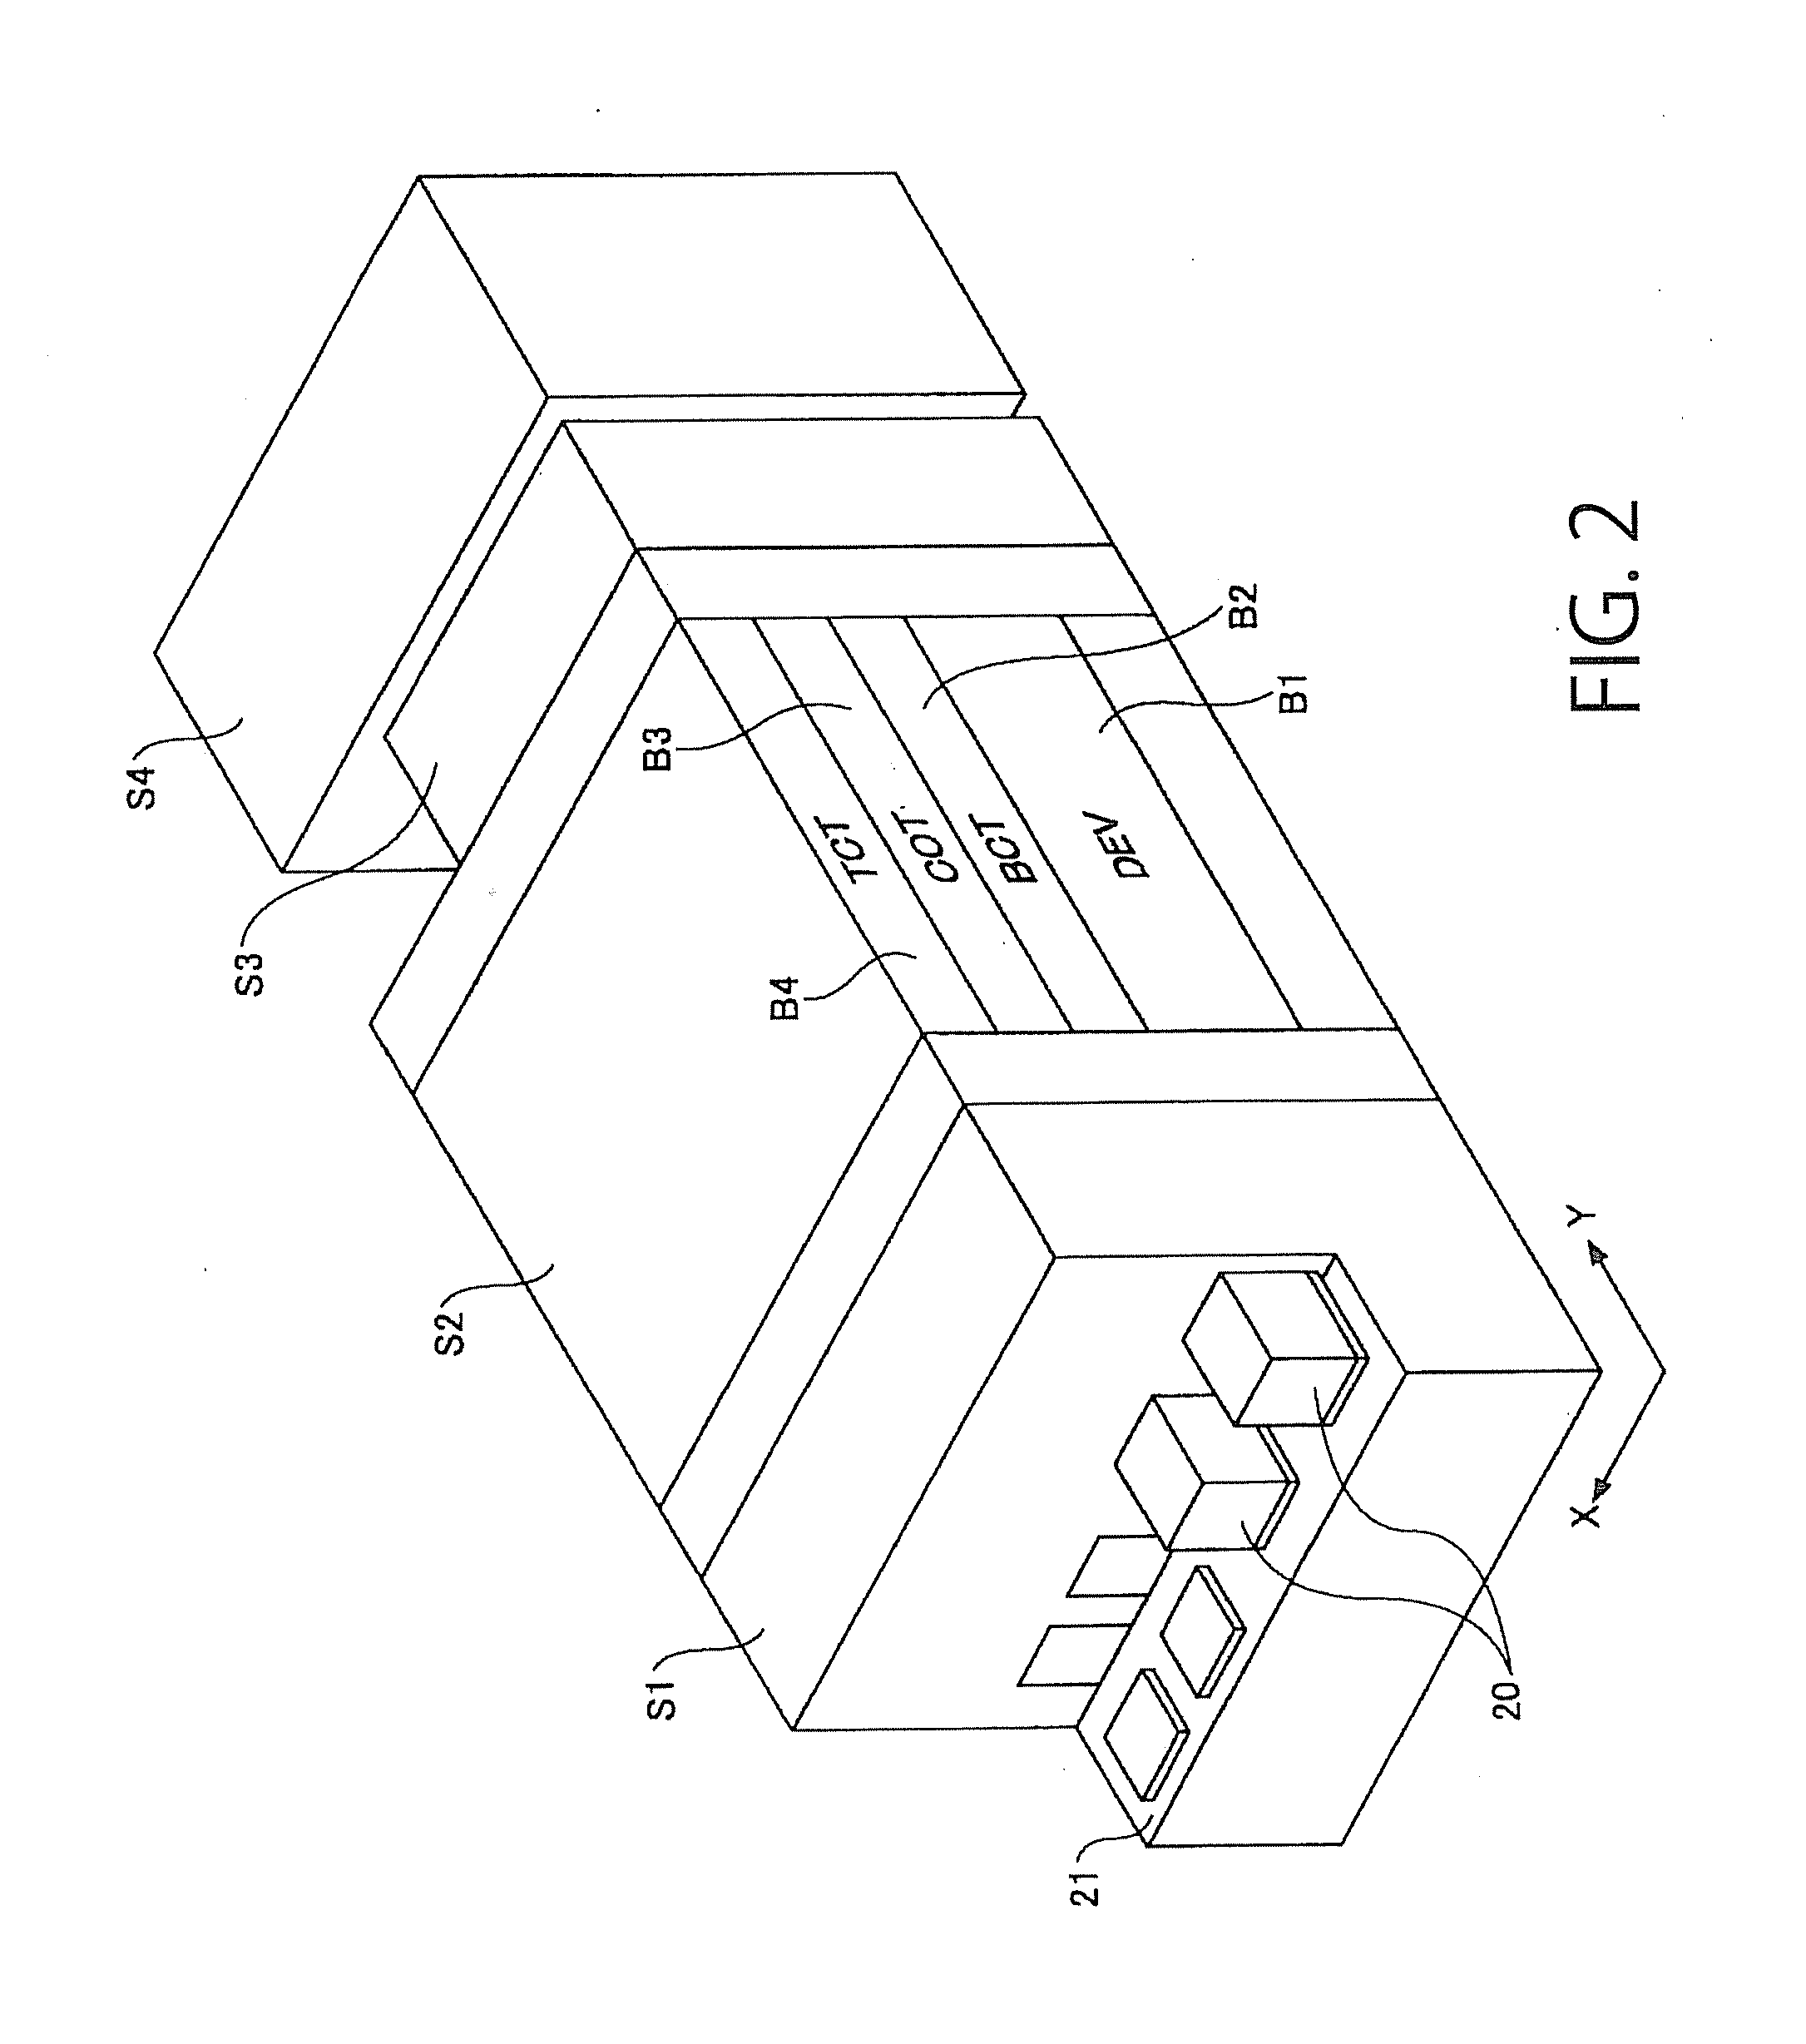 Substrate carrying mechanism, substrate carrying method and recording medium storing program including set of instructions to be executed to accomplish the substrate carrying method